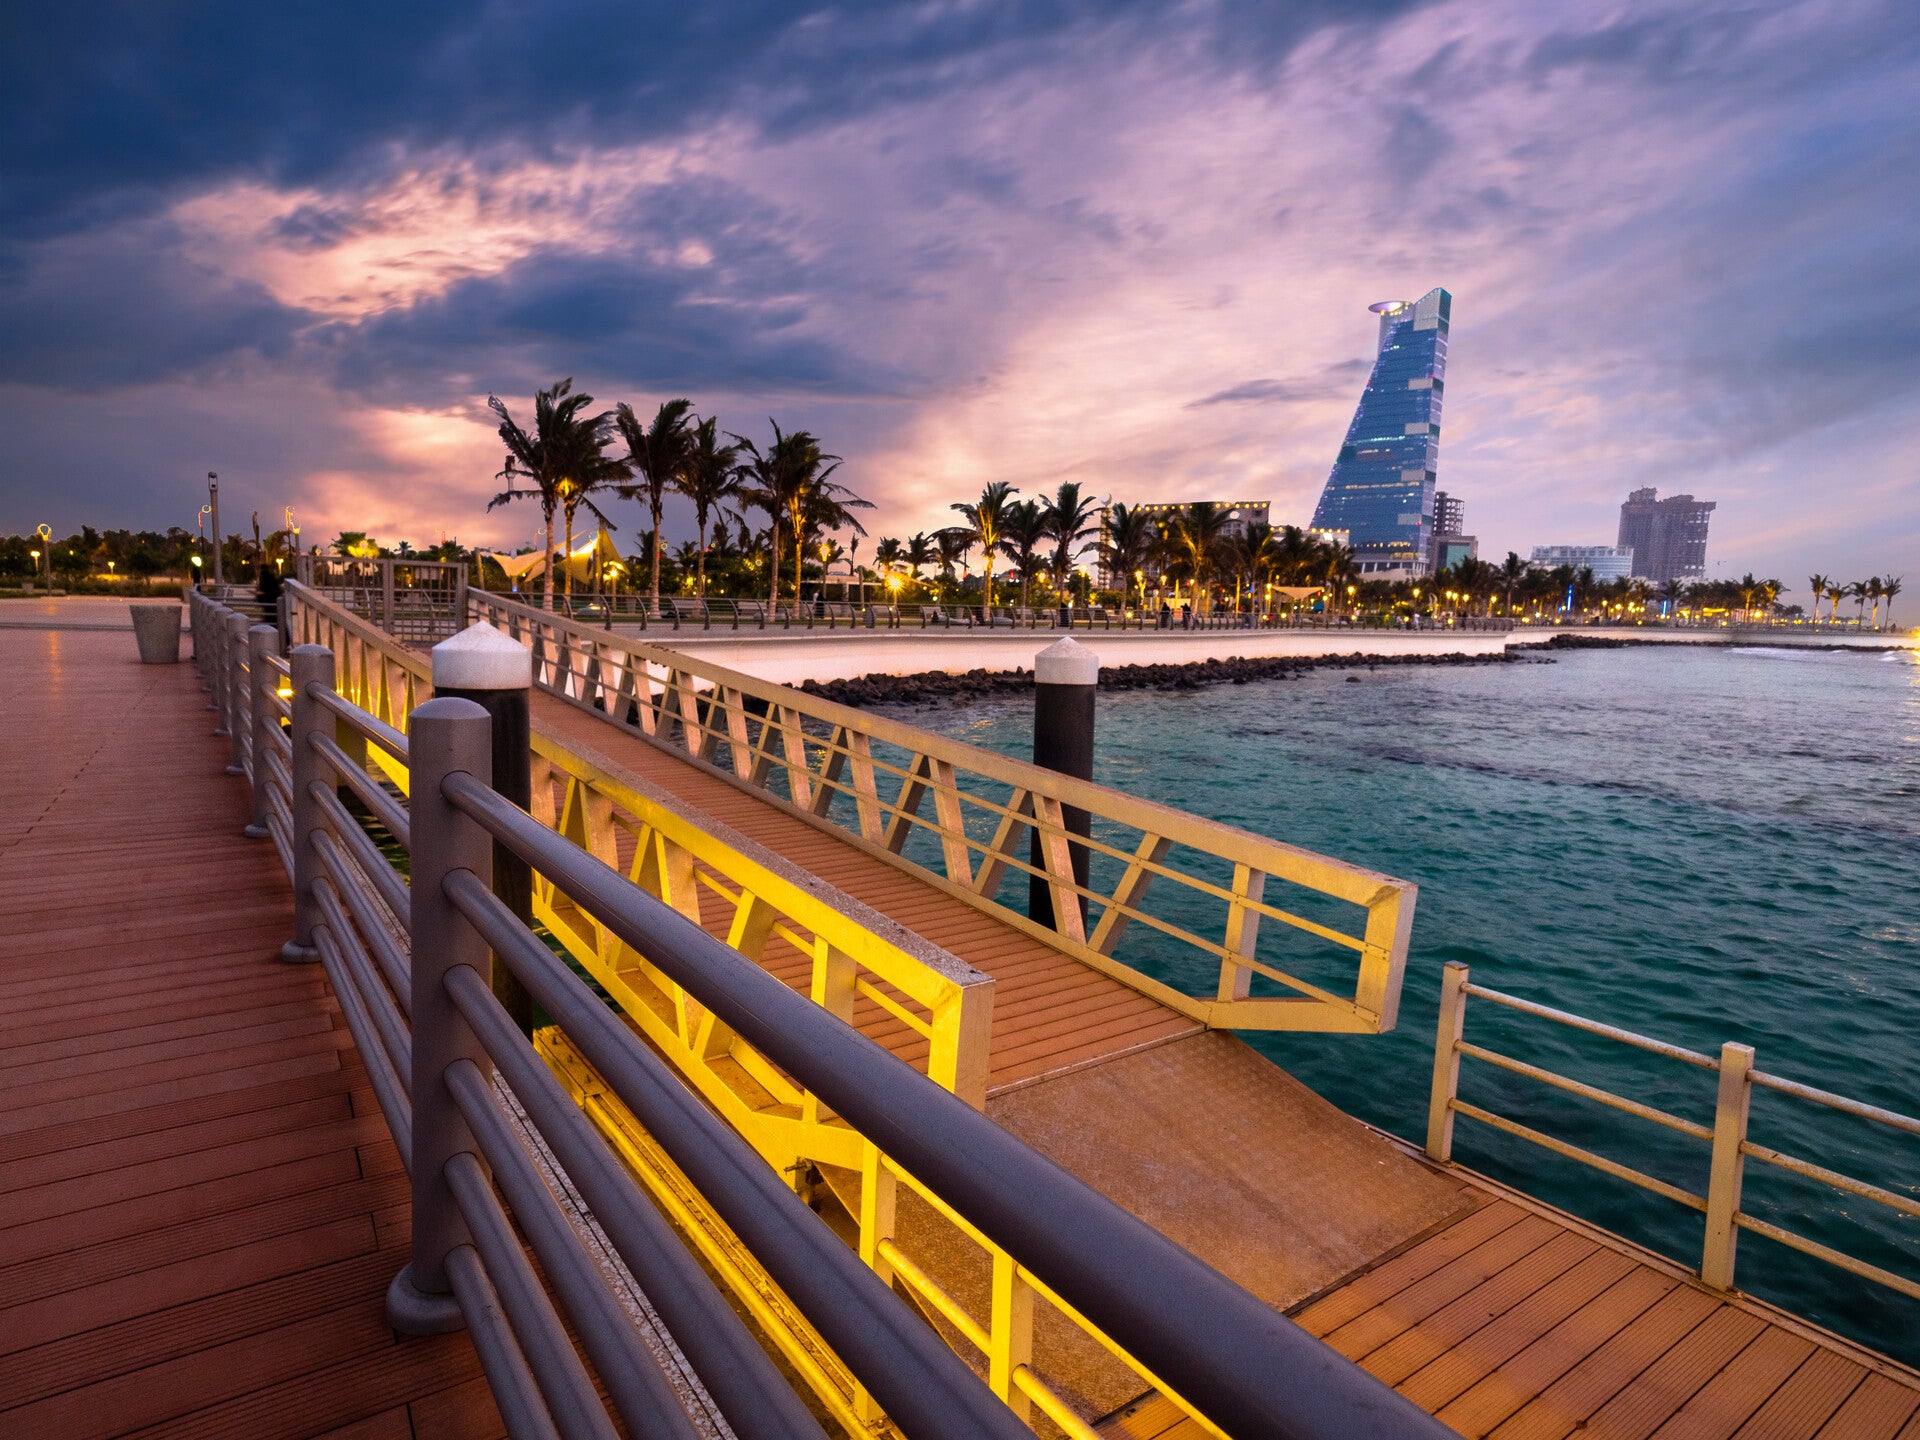 Enjoy food that boosts your mood on the beautiful Jeddah waterfront